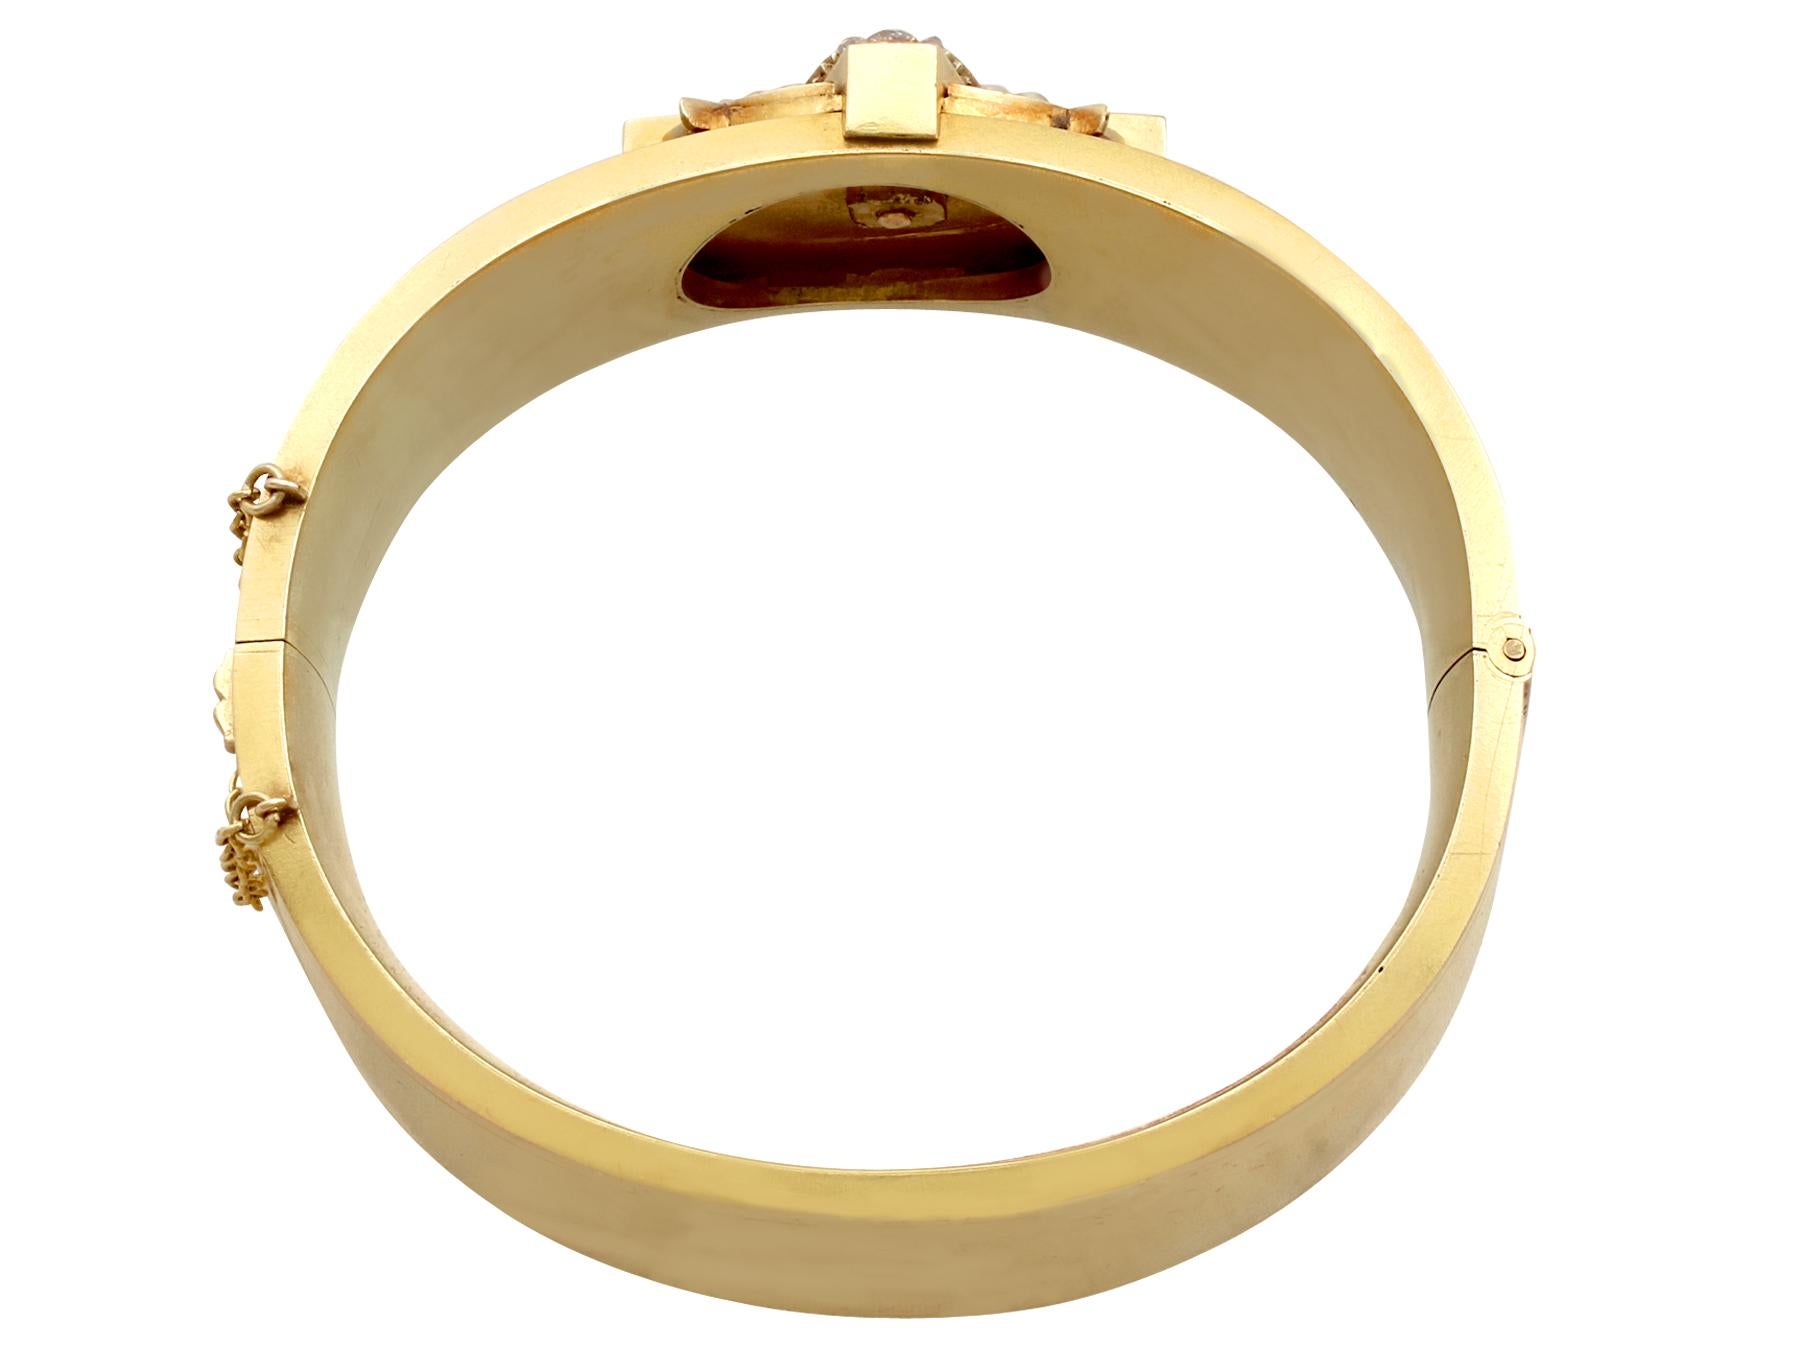 An exceptional and stunning antique 0.38 carat diamond and seed pearl embellished Victorian bangle in 20k yellow gold; part of our bangle and bracelet collection

This stunning Victorian bangle has been crafted in 20k yellow gold.

The feature